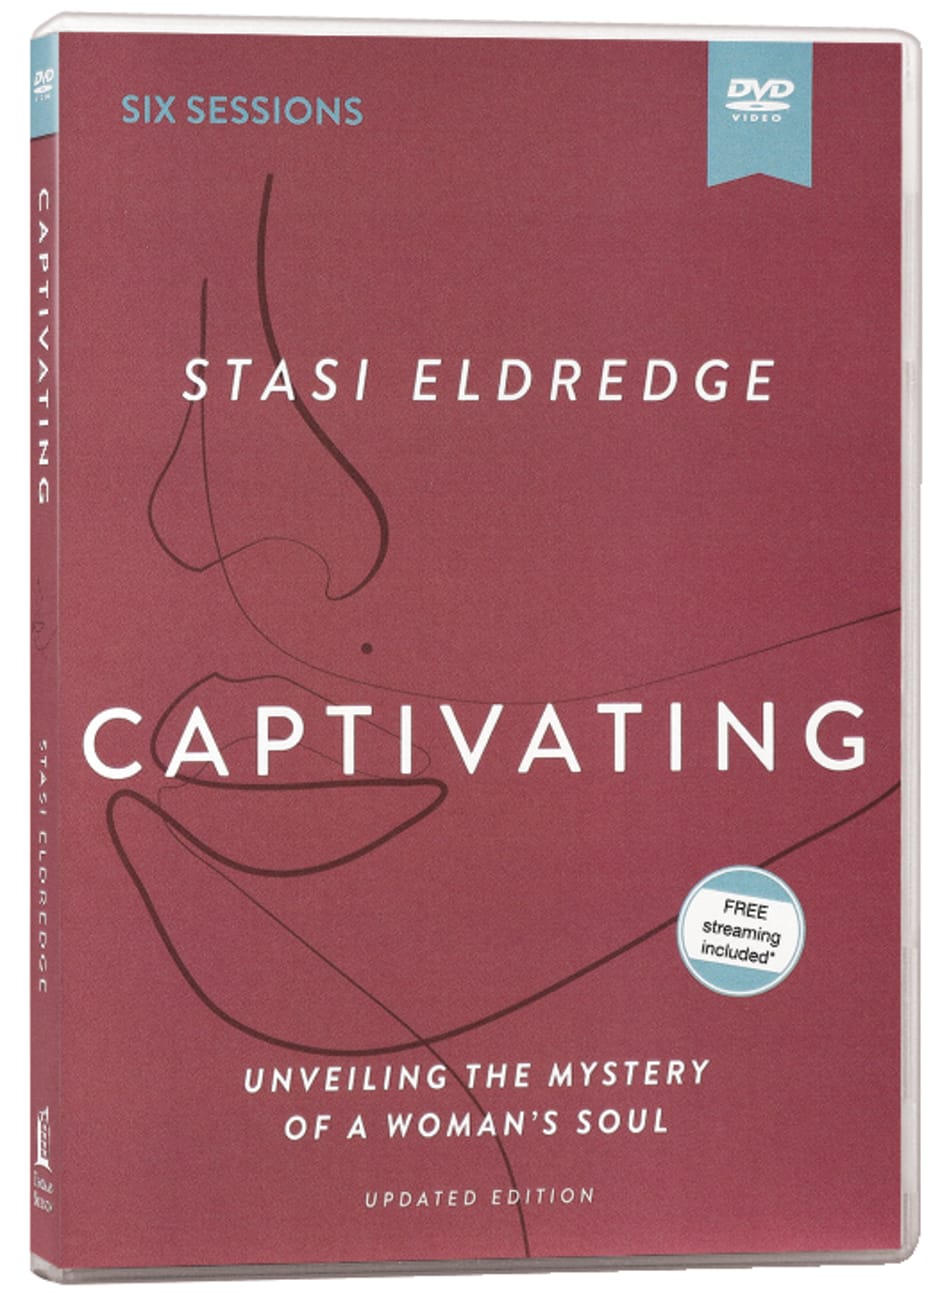 Captivating: Unveiling the Mystery of a Woman's Soul (Video Study) DVD